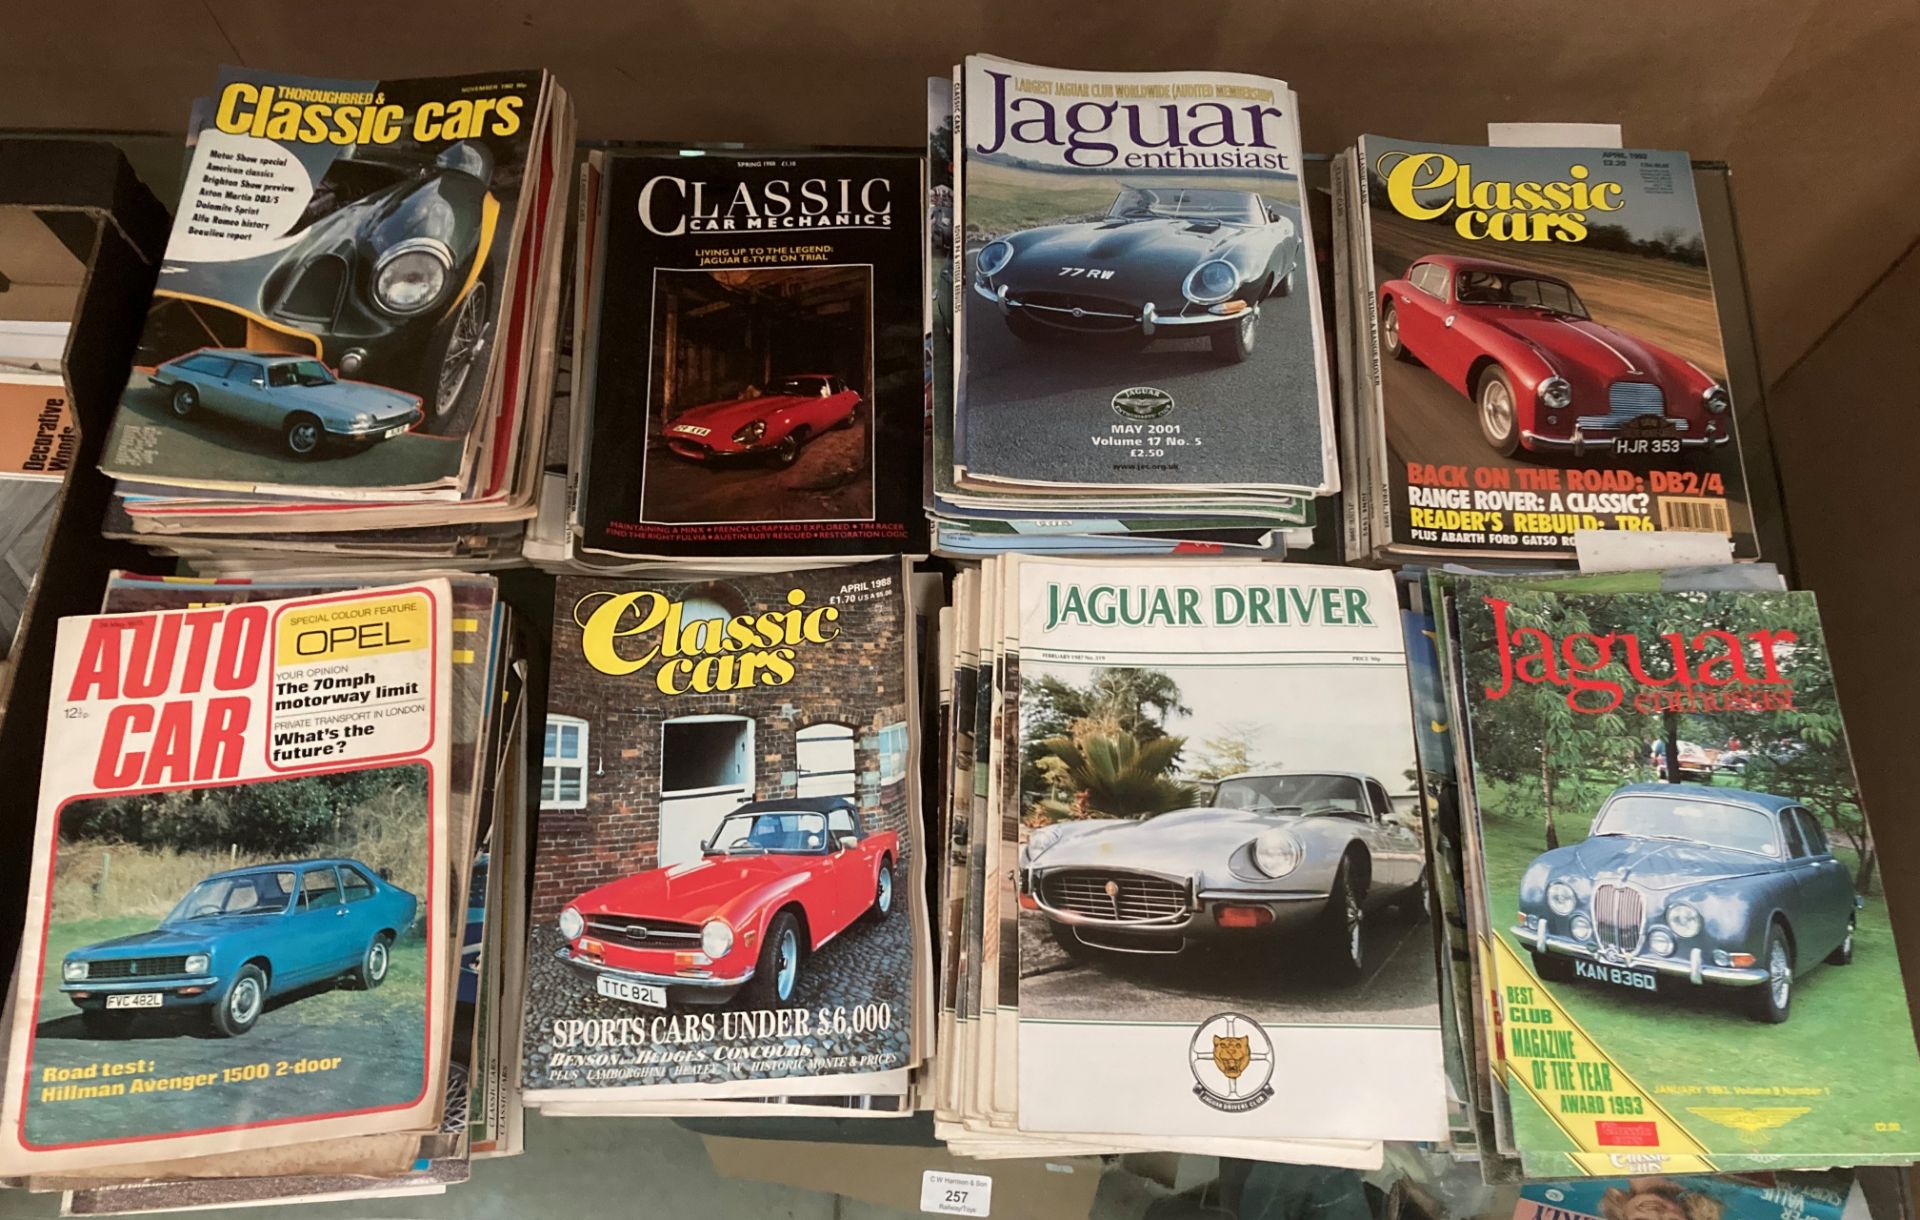 Contents to eight stacks - a quantity of vintage car magazines,